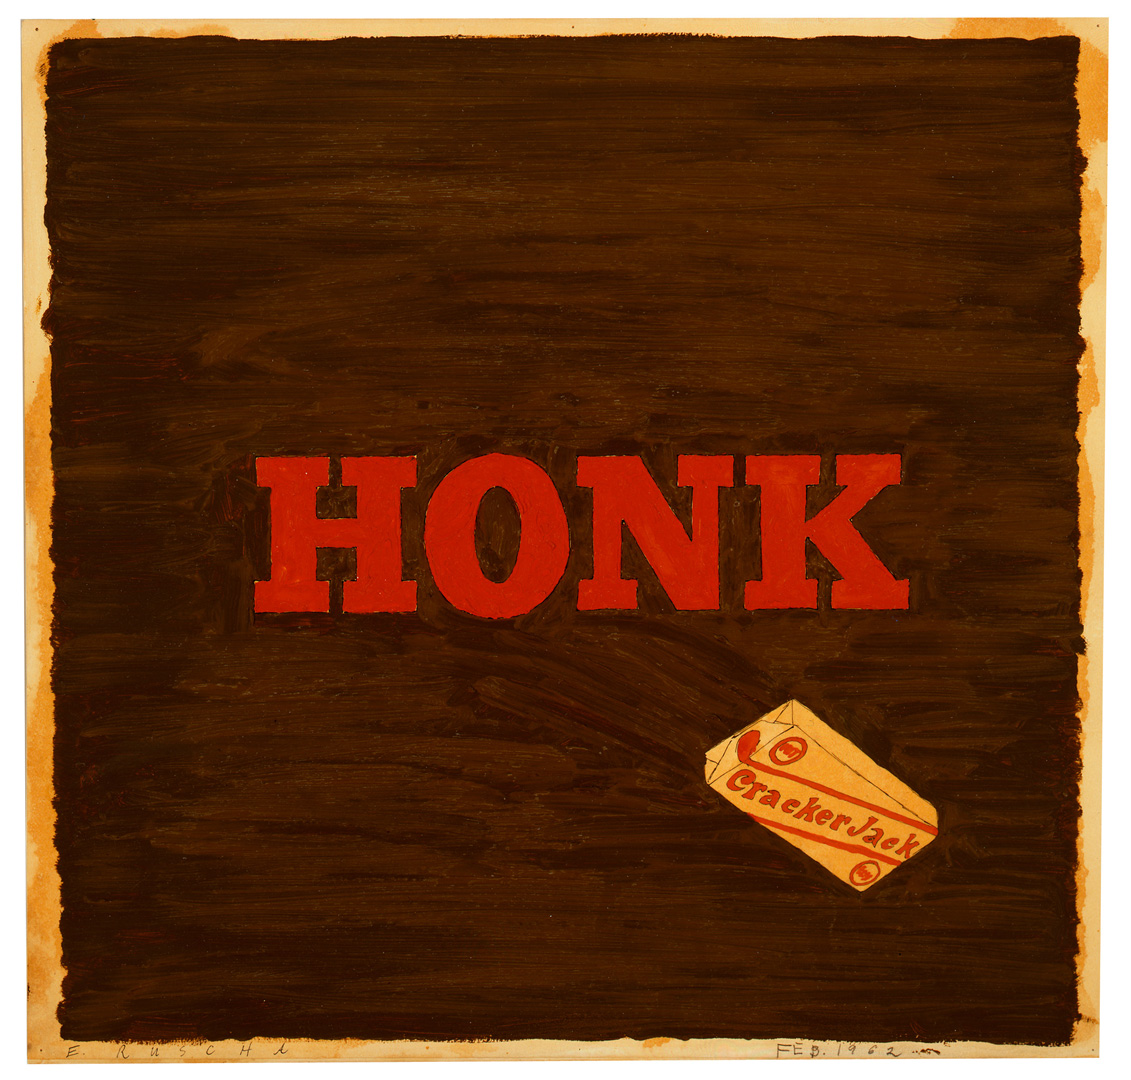 Ed Ruscha - Honk (Cracker Jack), 1962, oil, black ink, and pencil on paper mounted on board